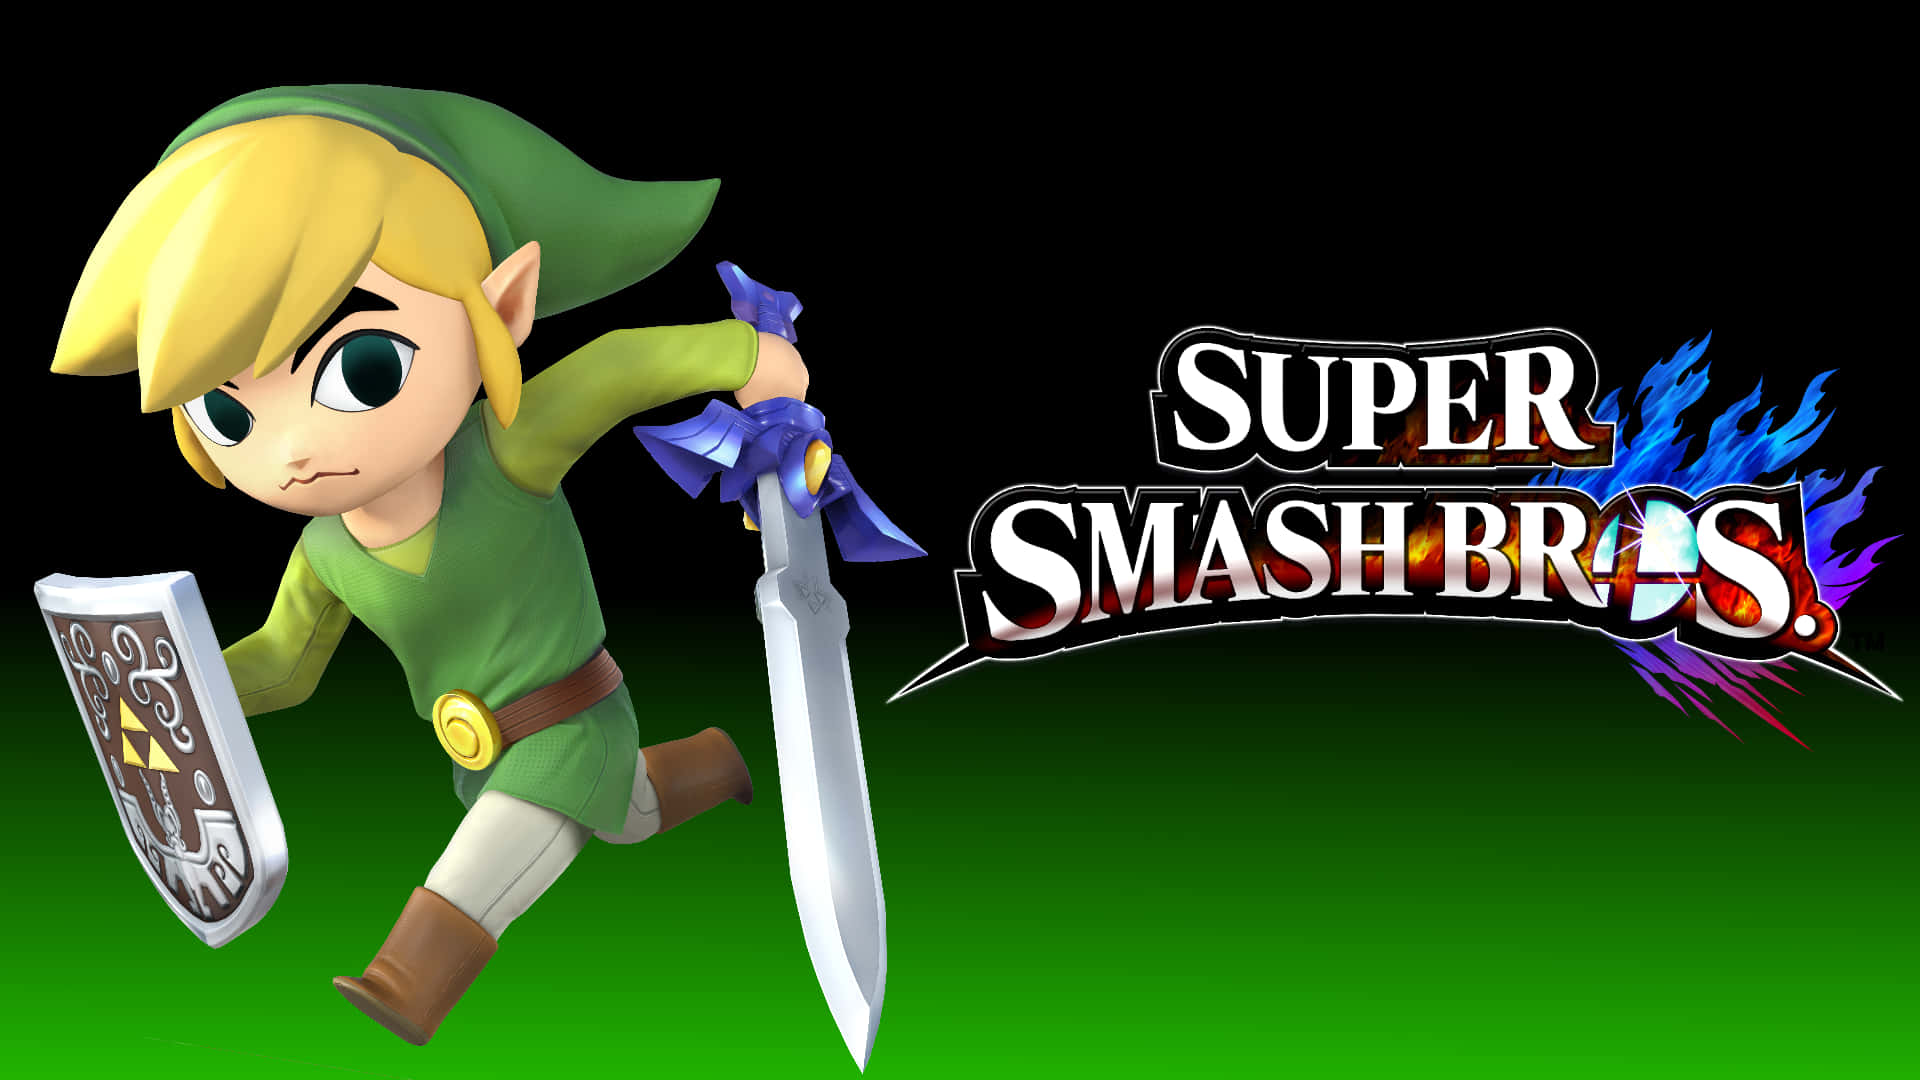 Toon Link With The Flaming Super Smash Bros Logo